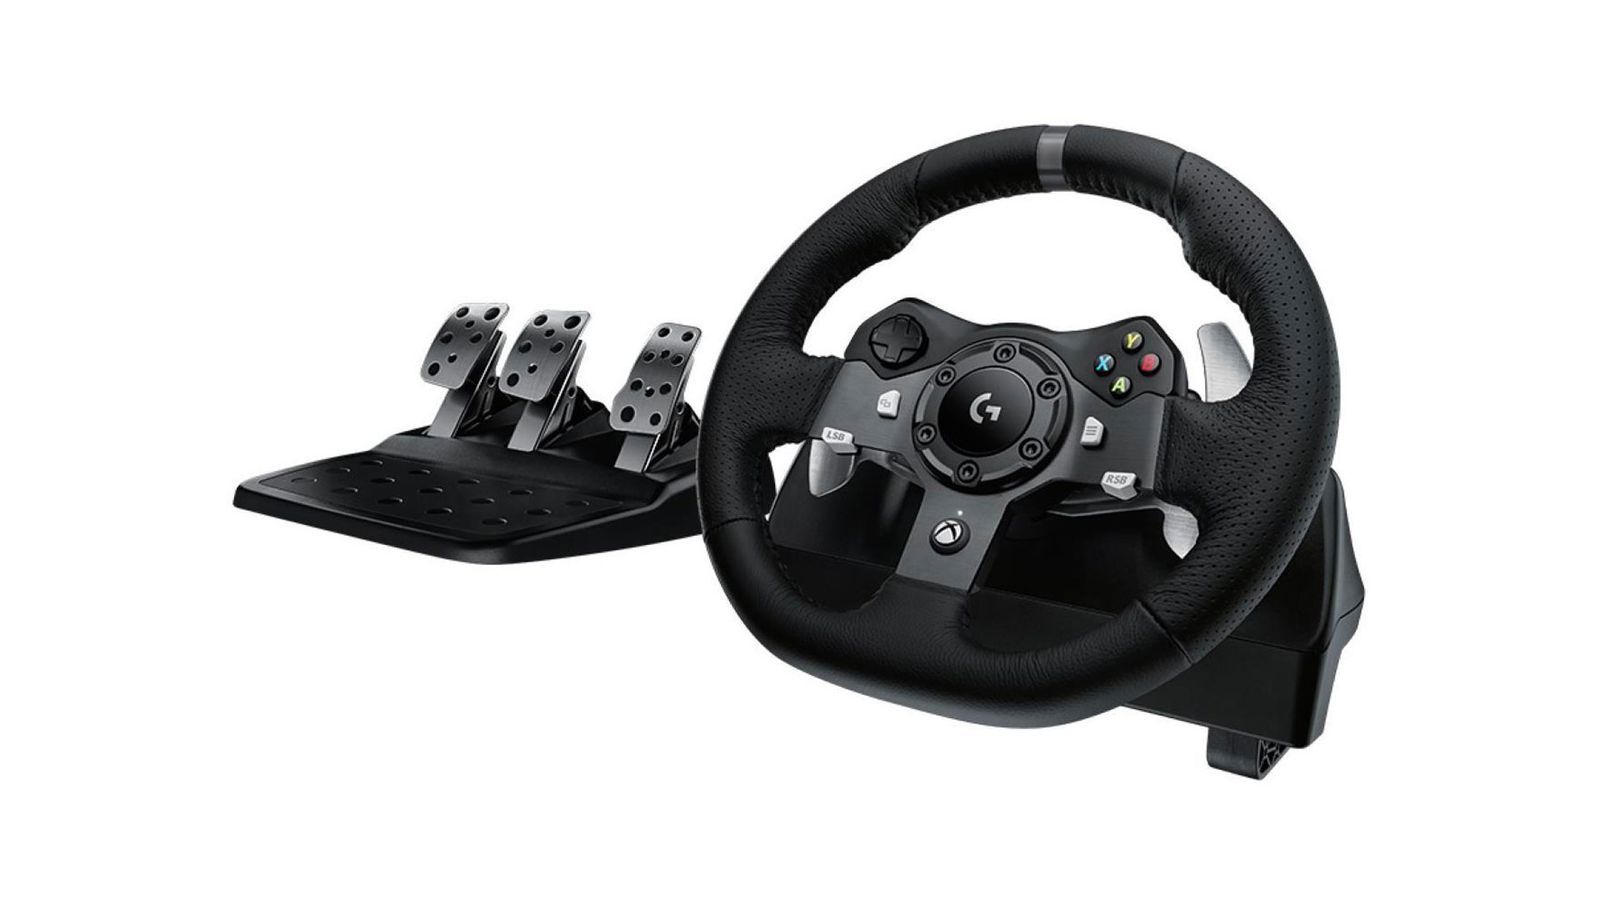 Logitech G G920 product image of a black racing wheel next to a set of pedals.